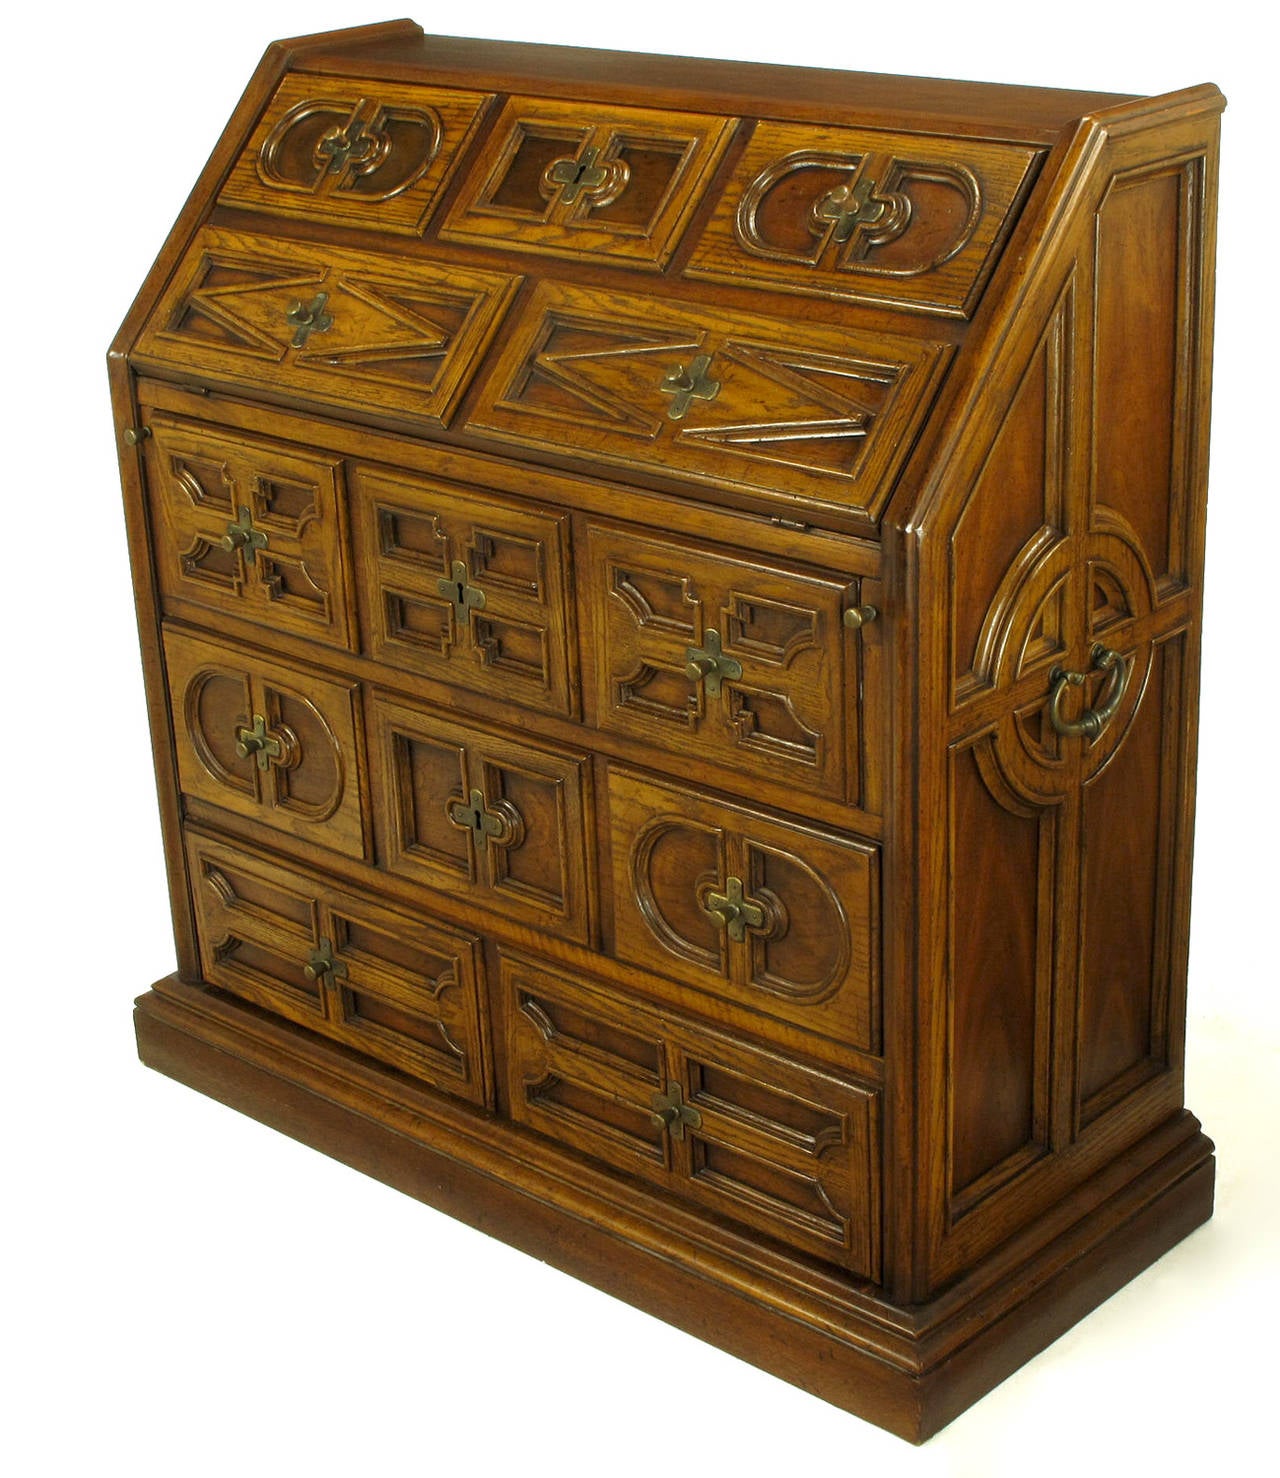 Drexel drop front desk from the Sandia Collection, circa 1960s. Interesting writing desk marrying the form of a Govenor Winthrop drop front desk with early English Jacobean style. Constructed of oak with brass handles and pulls, three full size